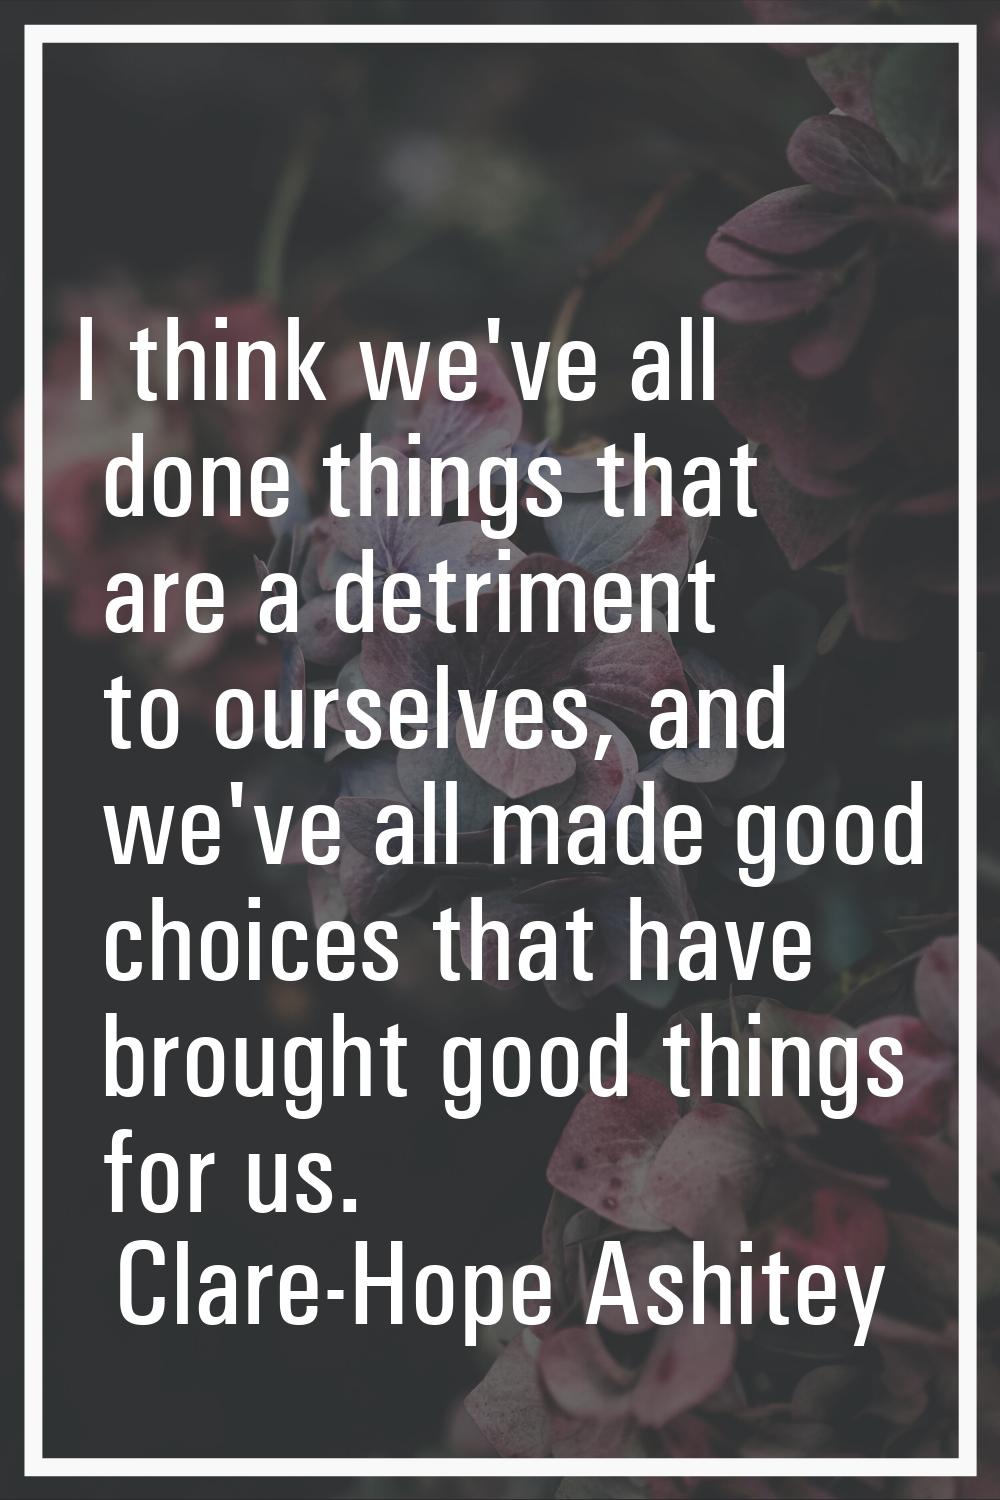 I think we've all done things that are a detriment to ourselves, and we've all made good choices th